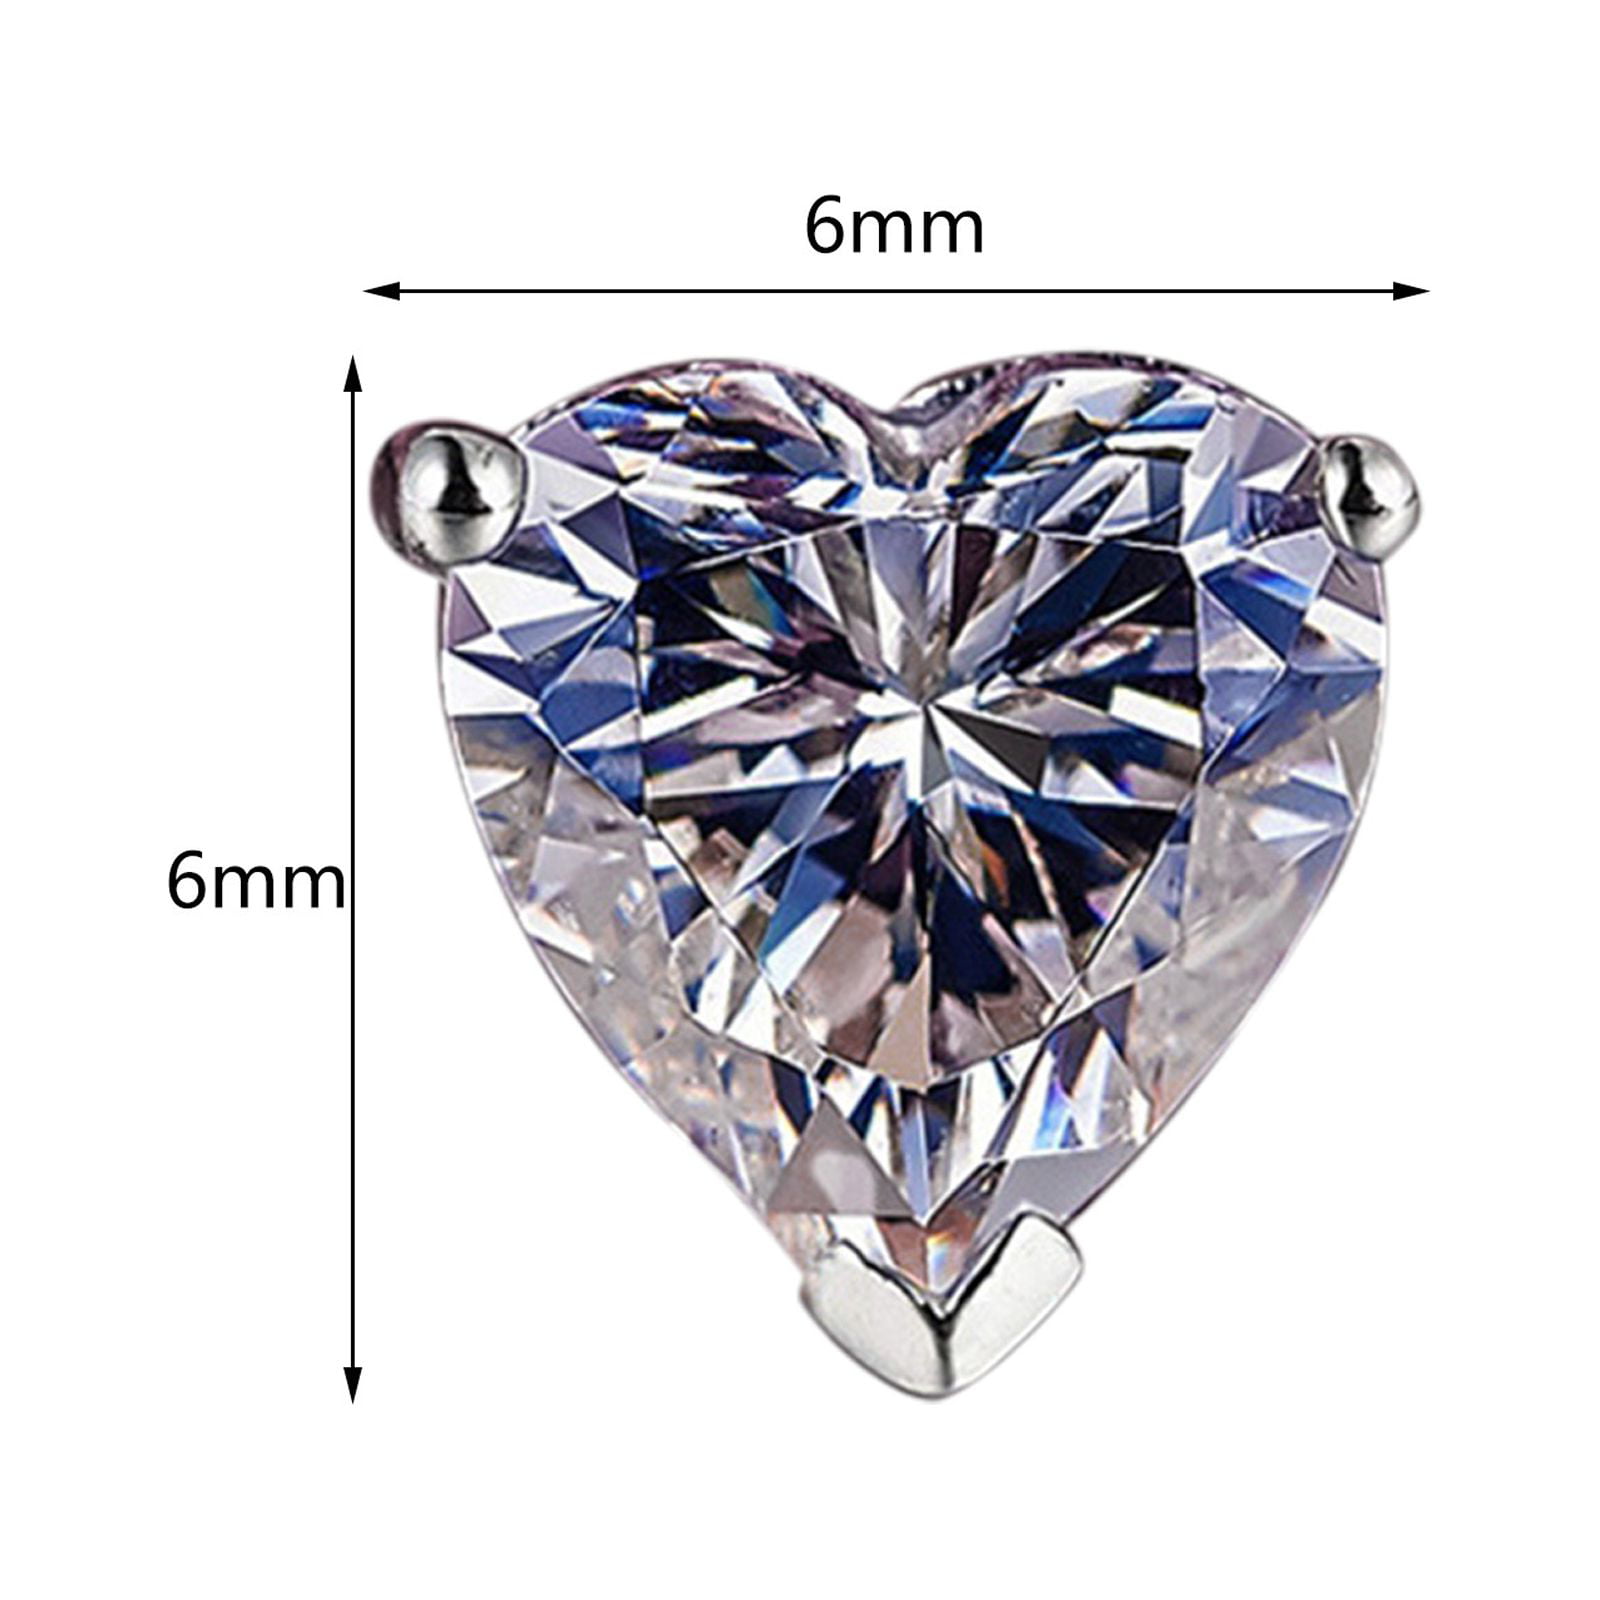 Enhance a Diamond Stud's Beauty With The open And Closed Setting Diamonds